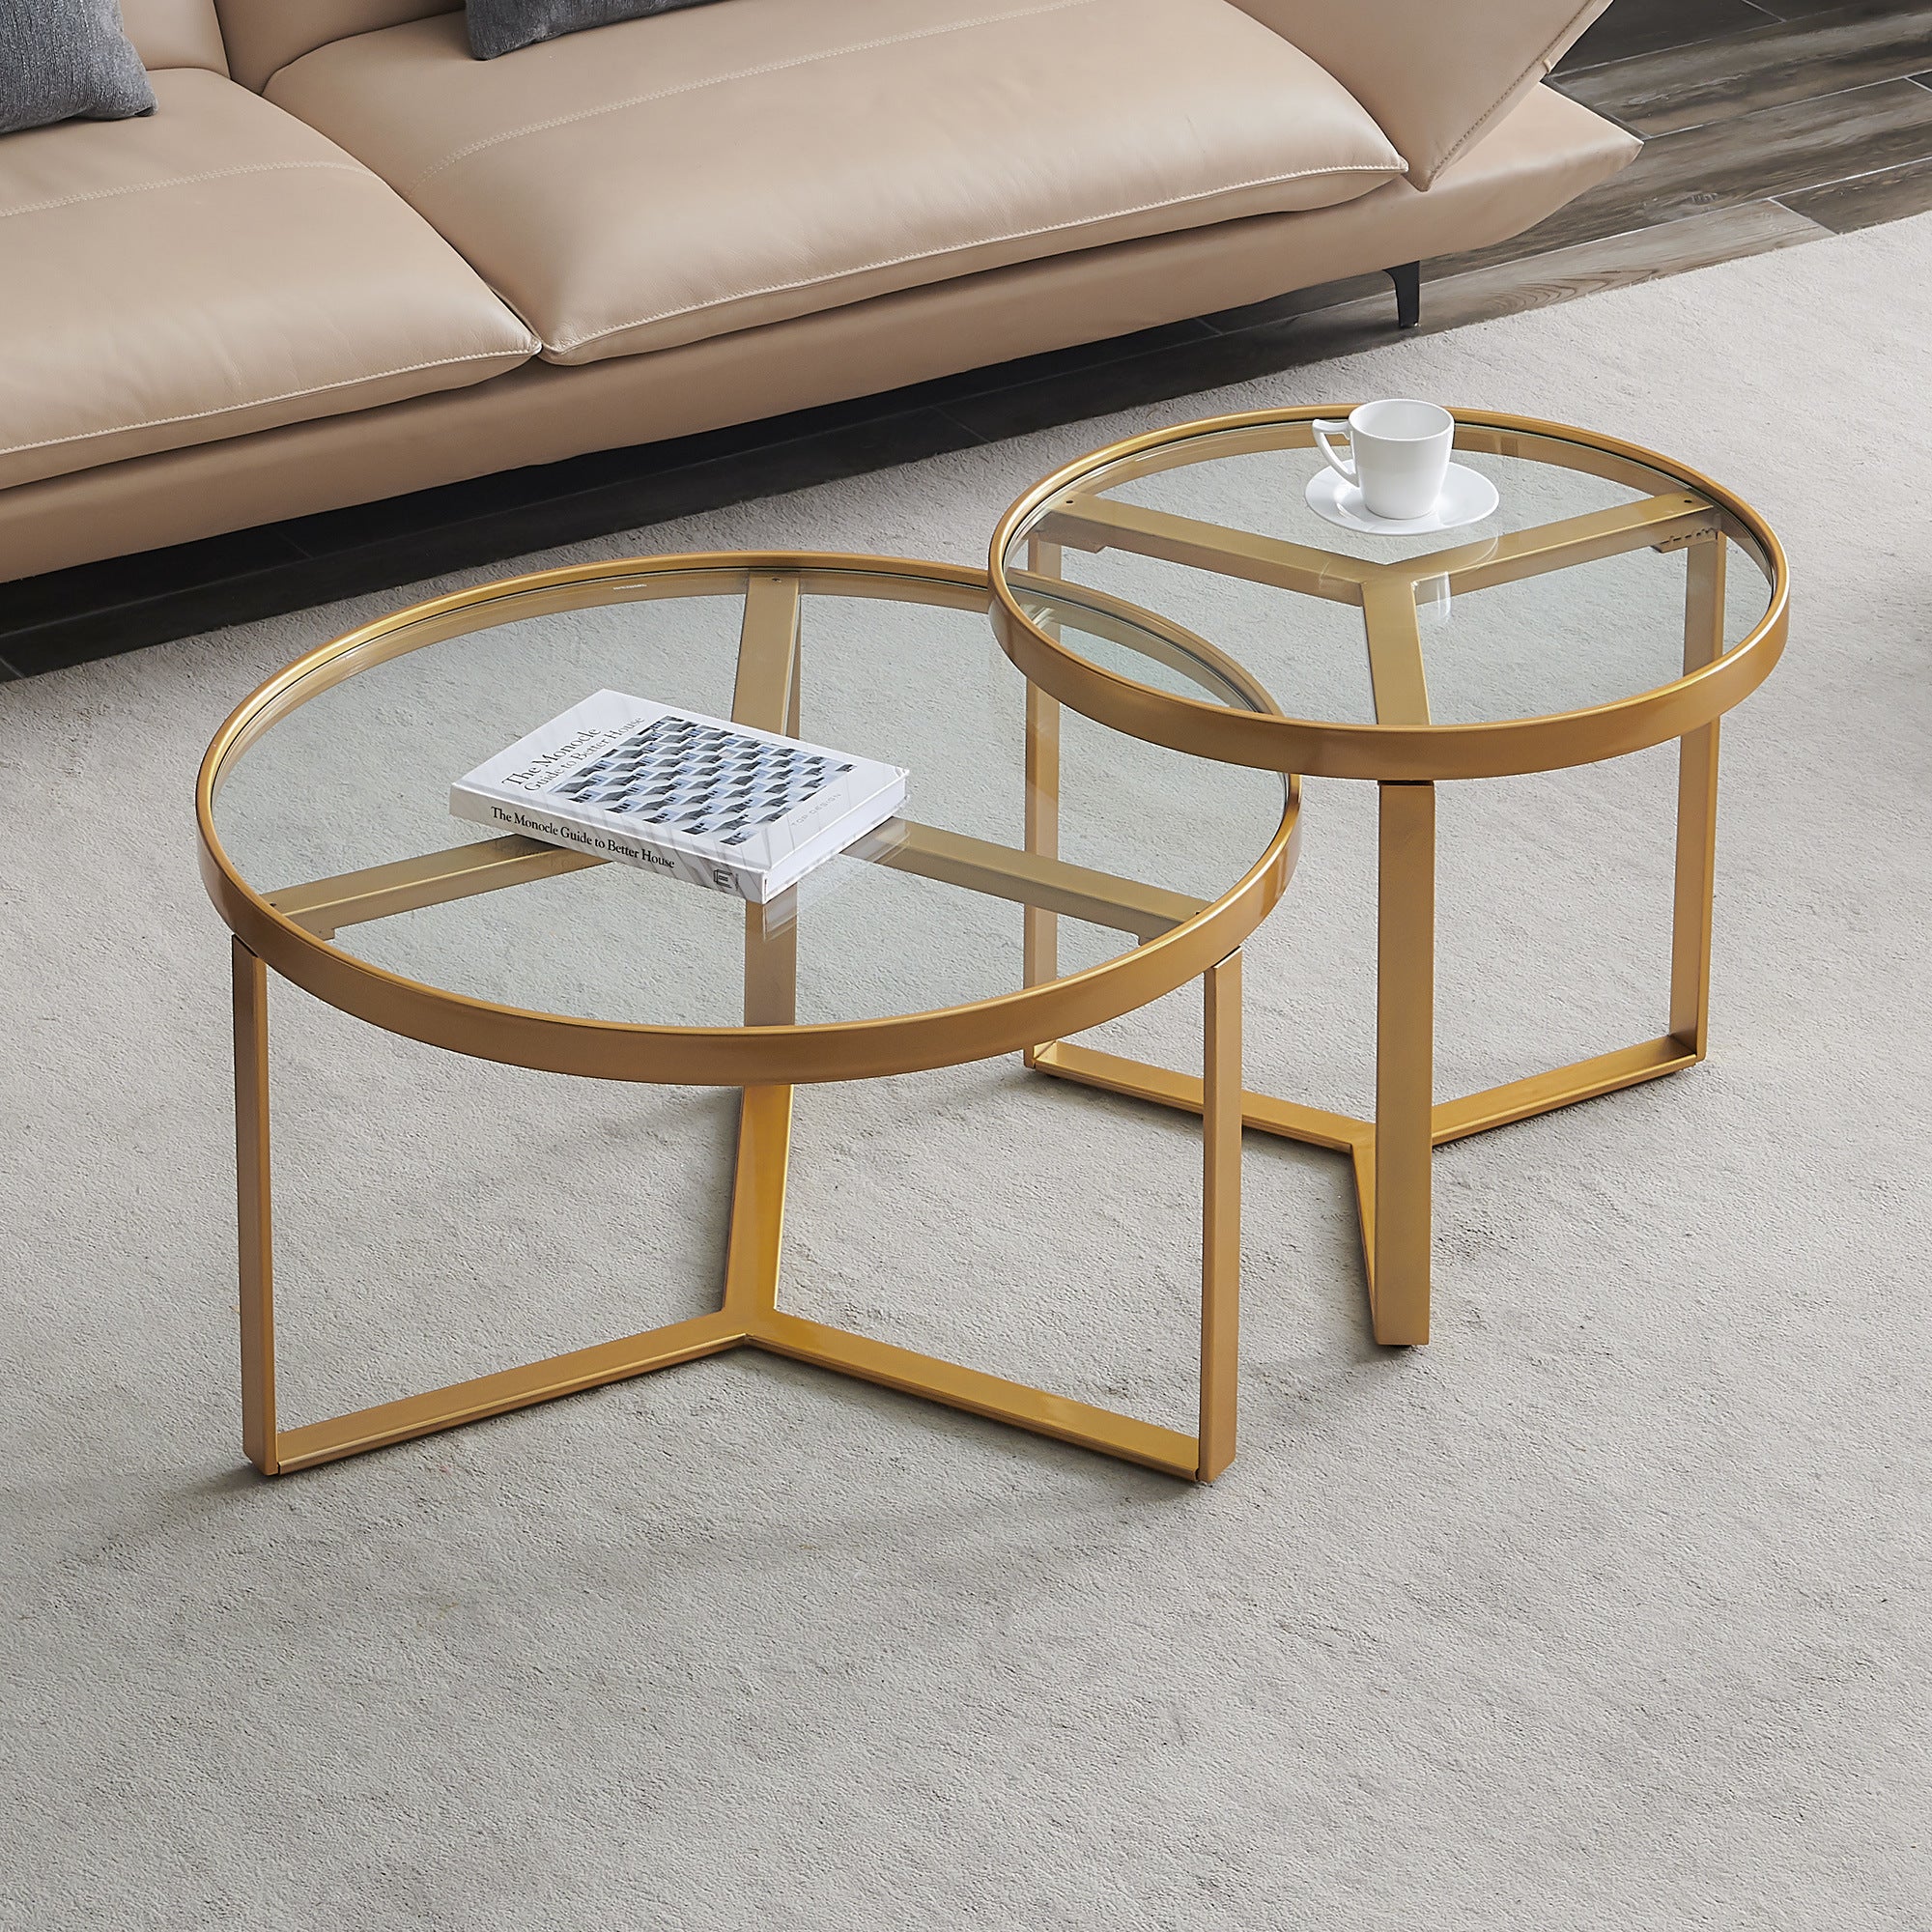 Modern Nesting coffee table; Golden metal frame with round tempered glass tabletop